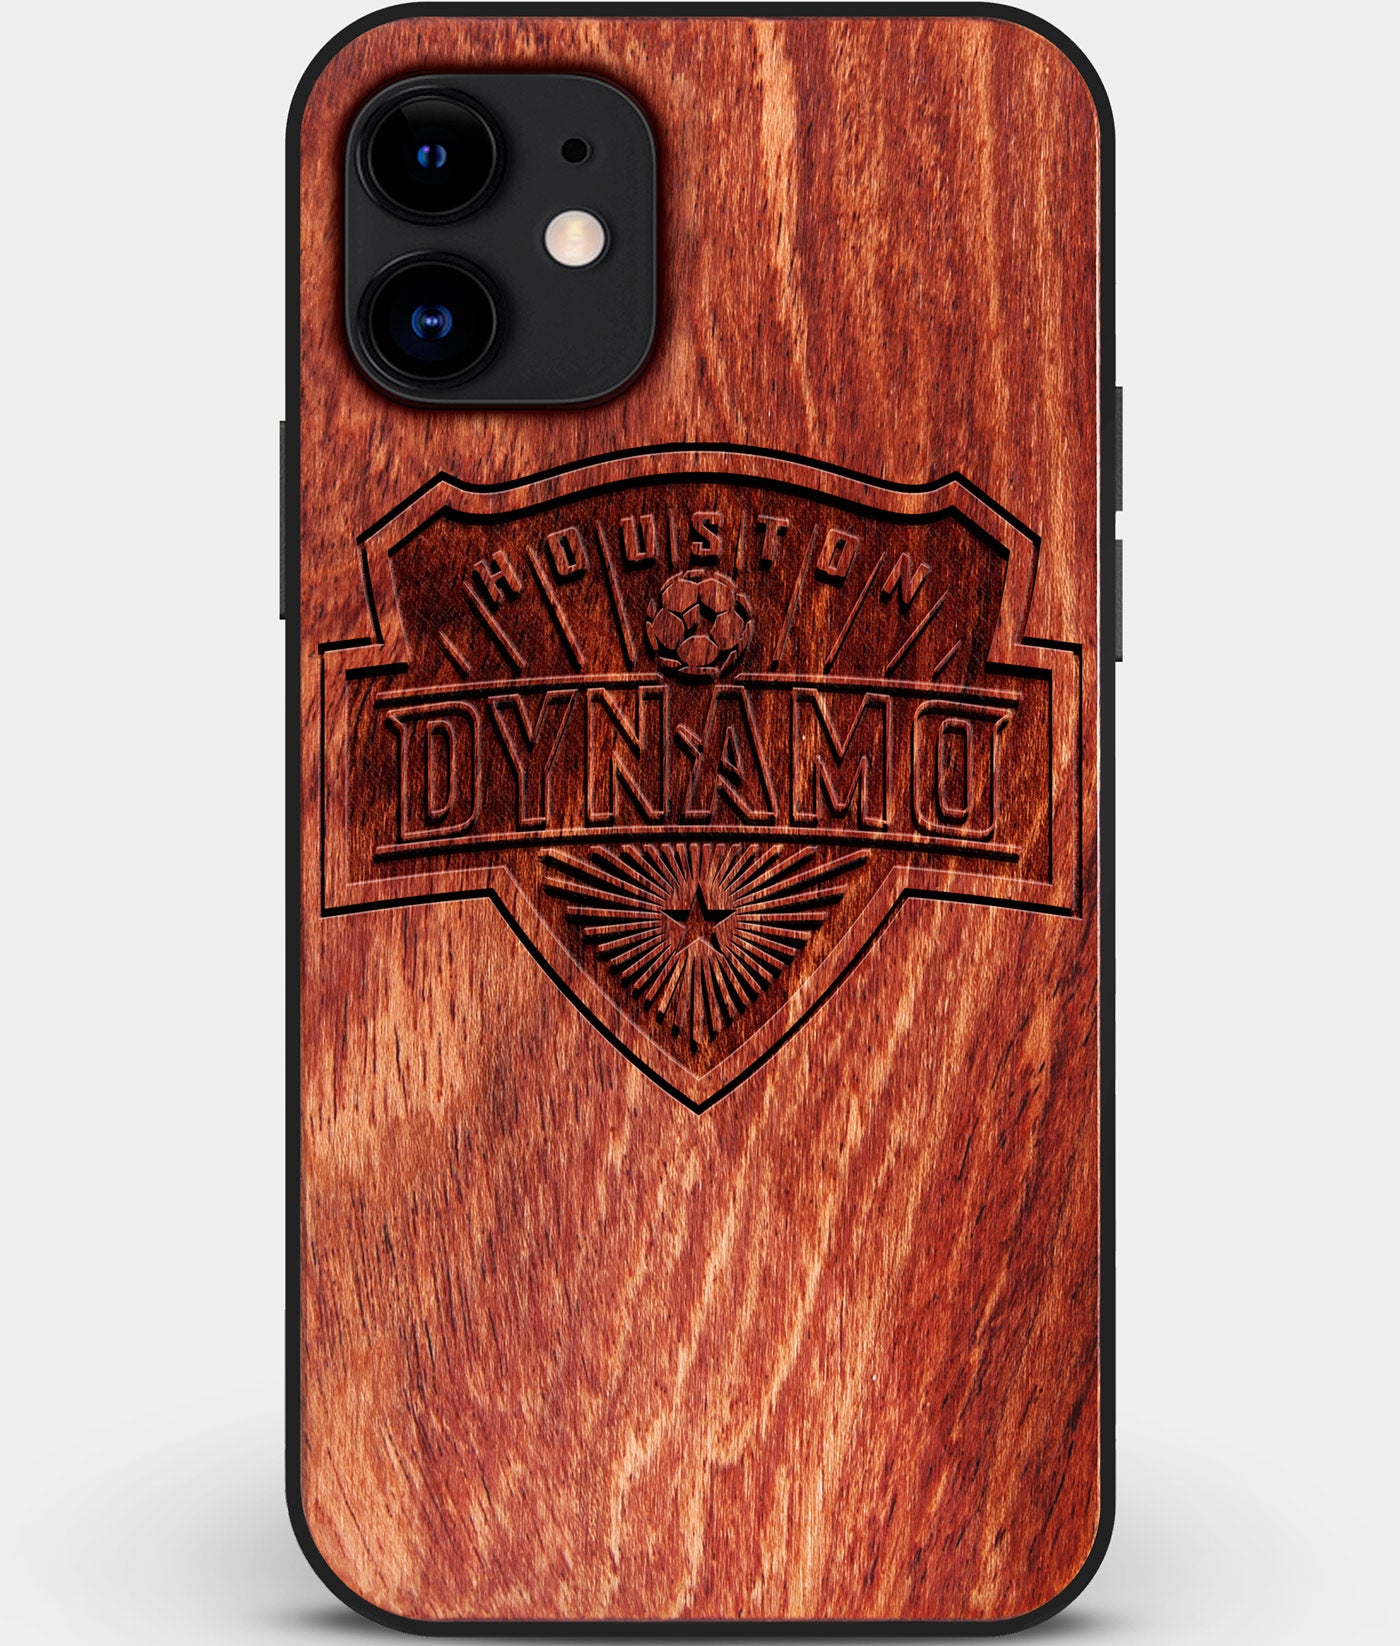 Custom Carved Wood Houston Dynamo iPhone 11 Case | Personalized Mahogany Wood Houston Dynamo Cover, Birthday Gift, Gifts For Him, Monogrammed Gift For Fan | by Engraved In Nature